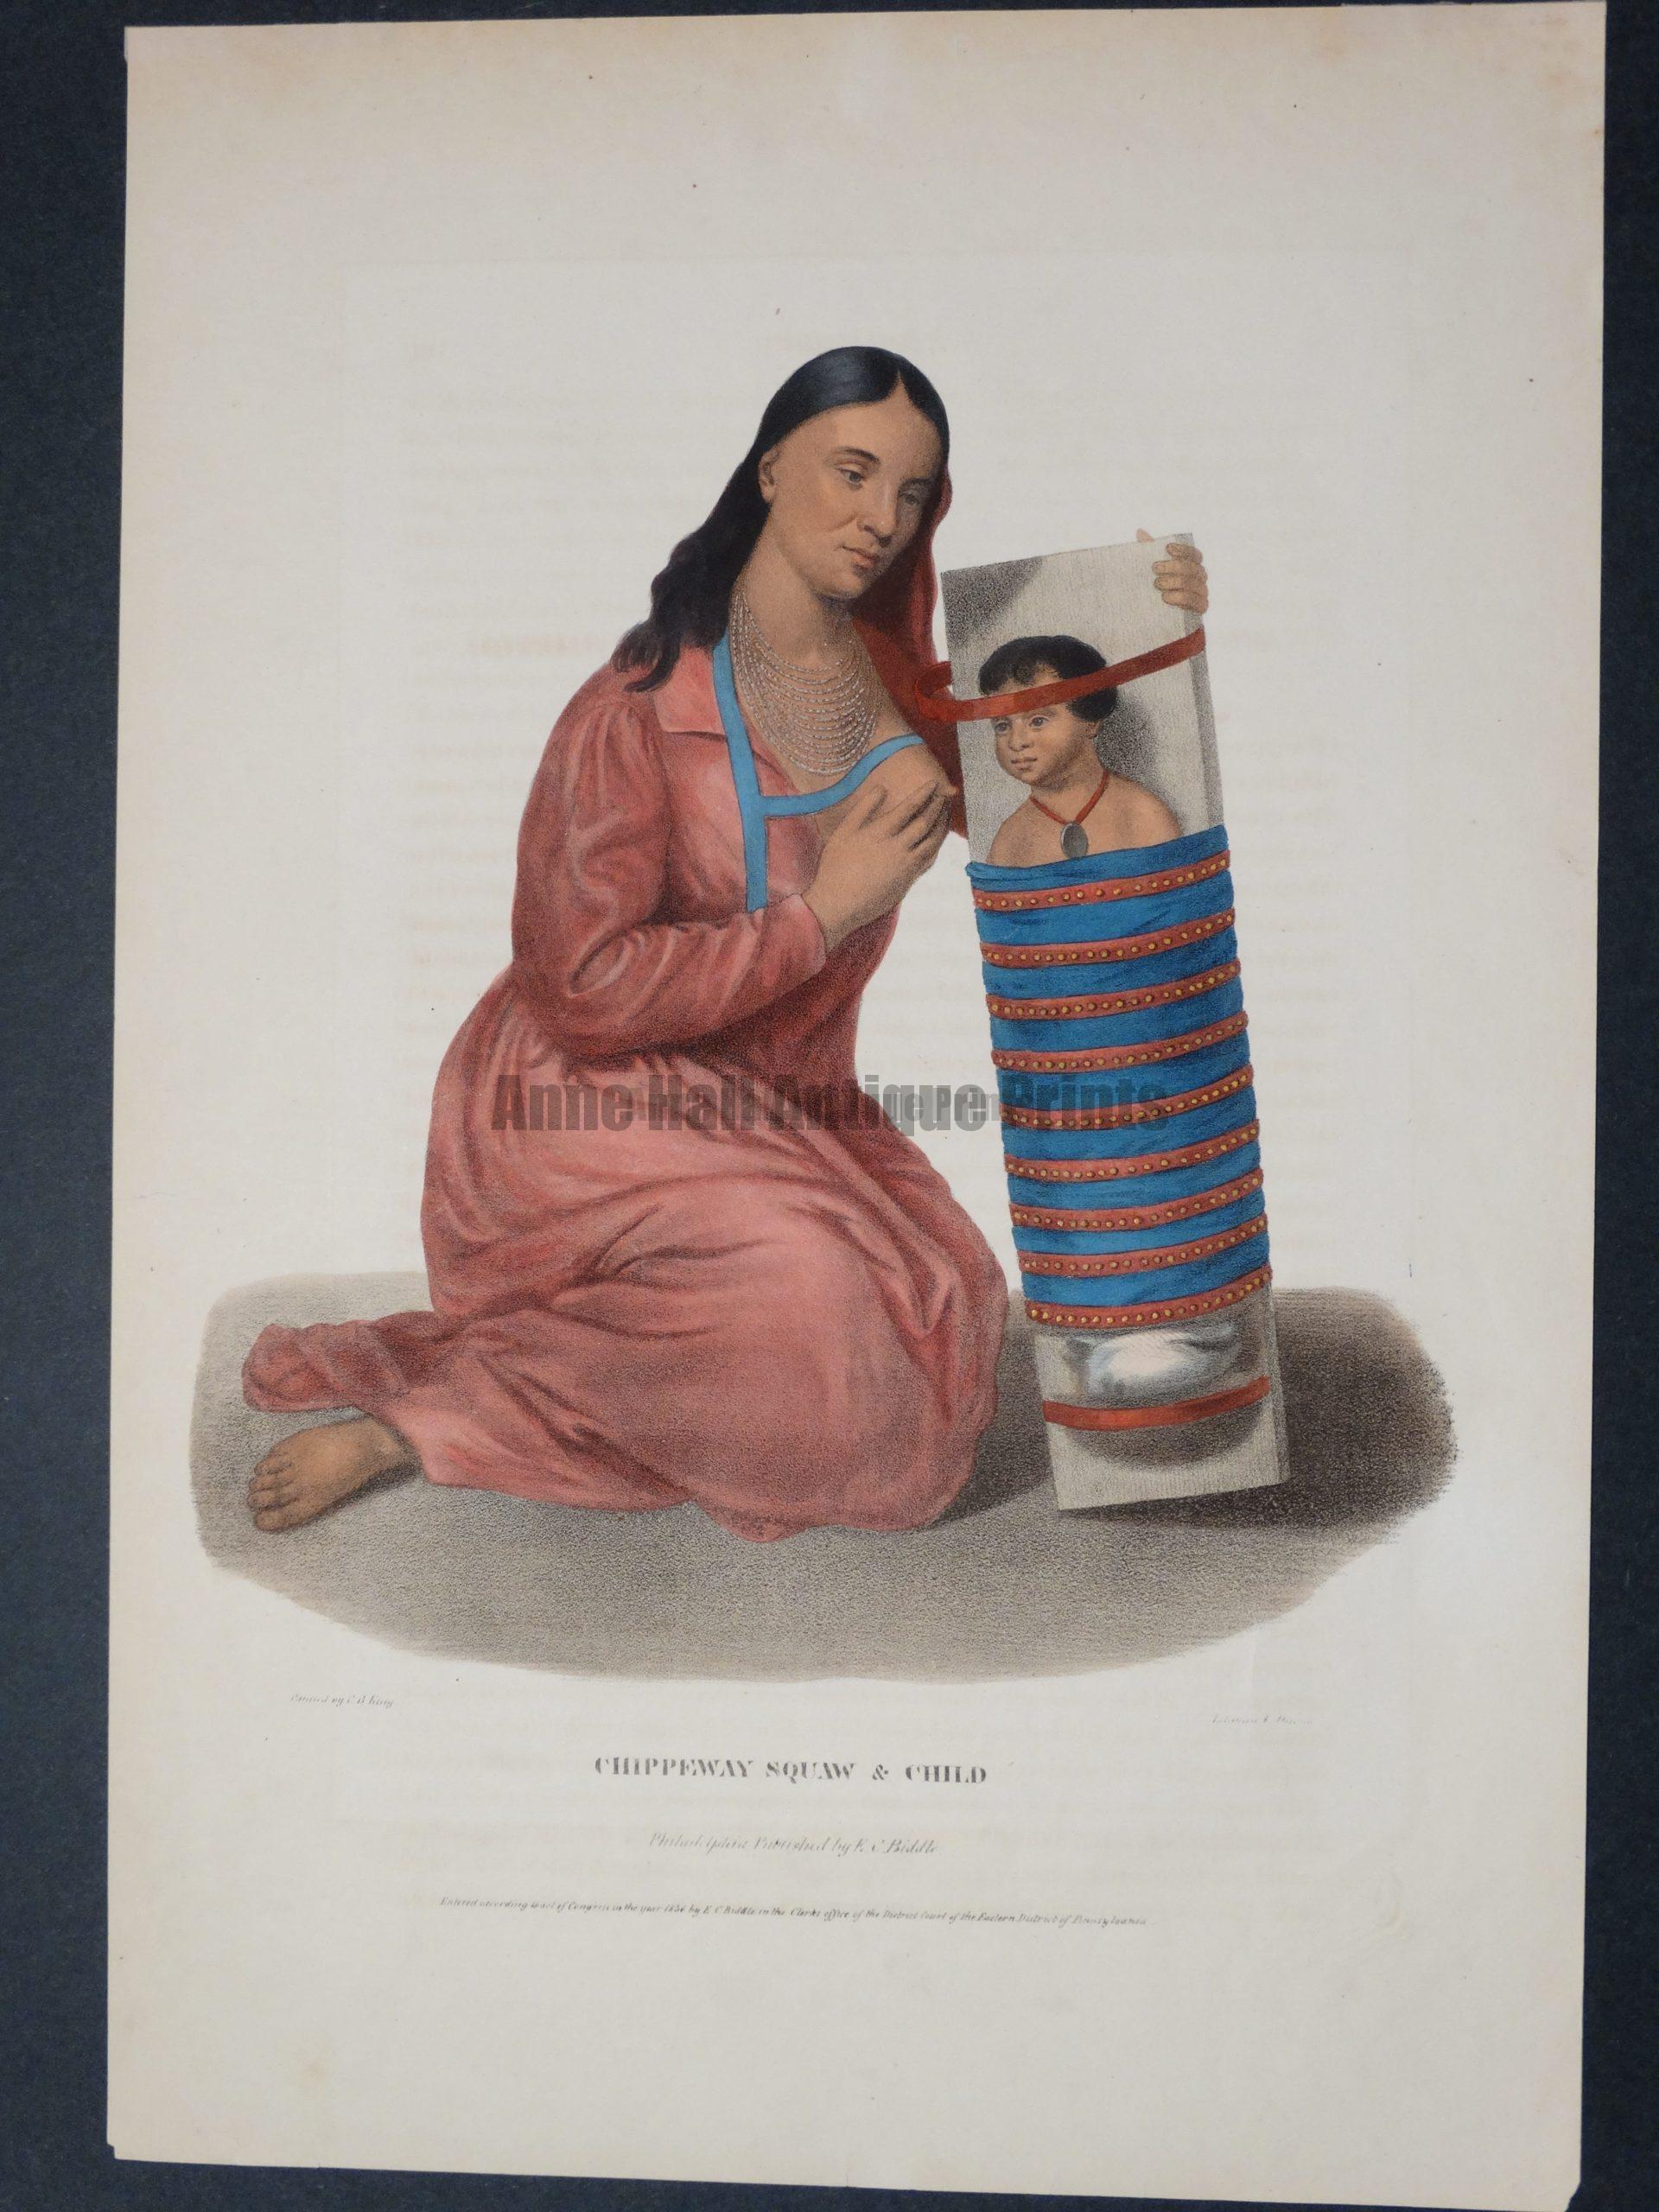 Original folio lithograph, of Chippeway Squaw & Child, McKenney and Hall,sourced from Indian Tribes of North America